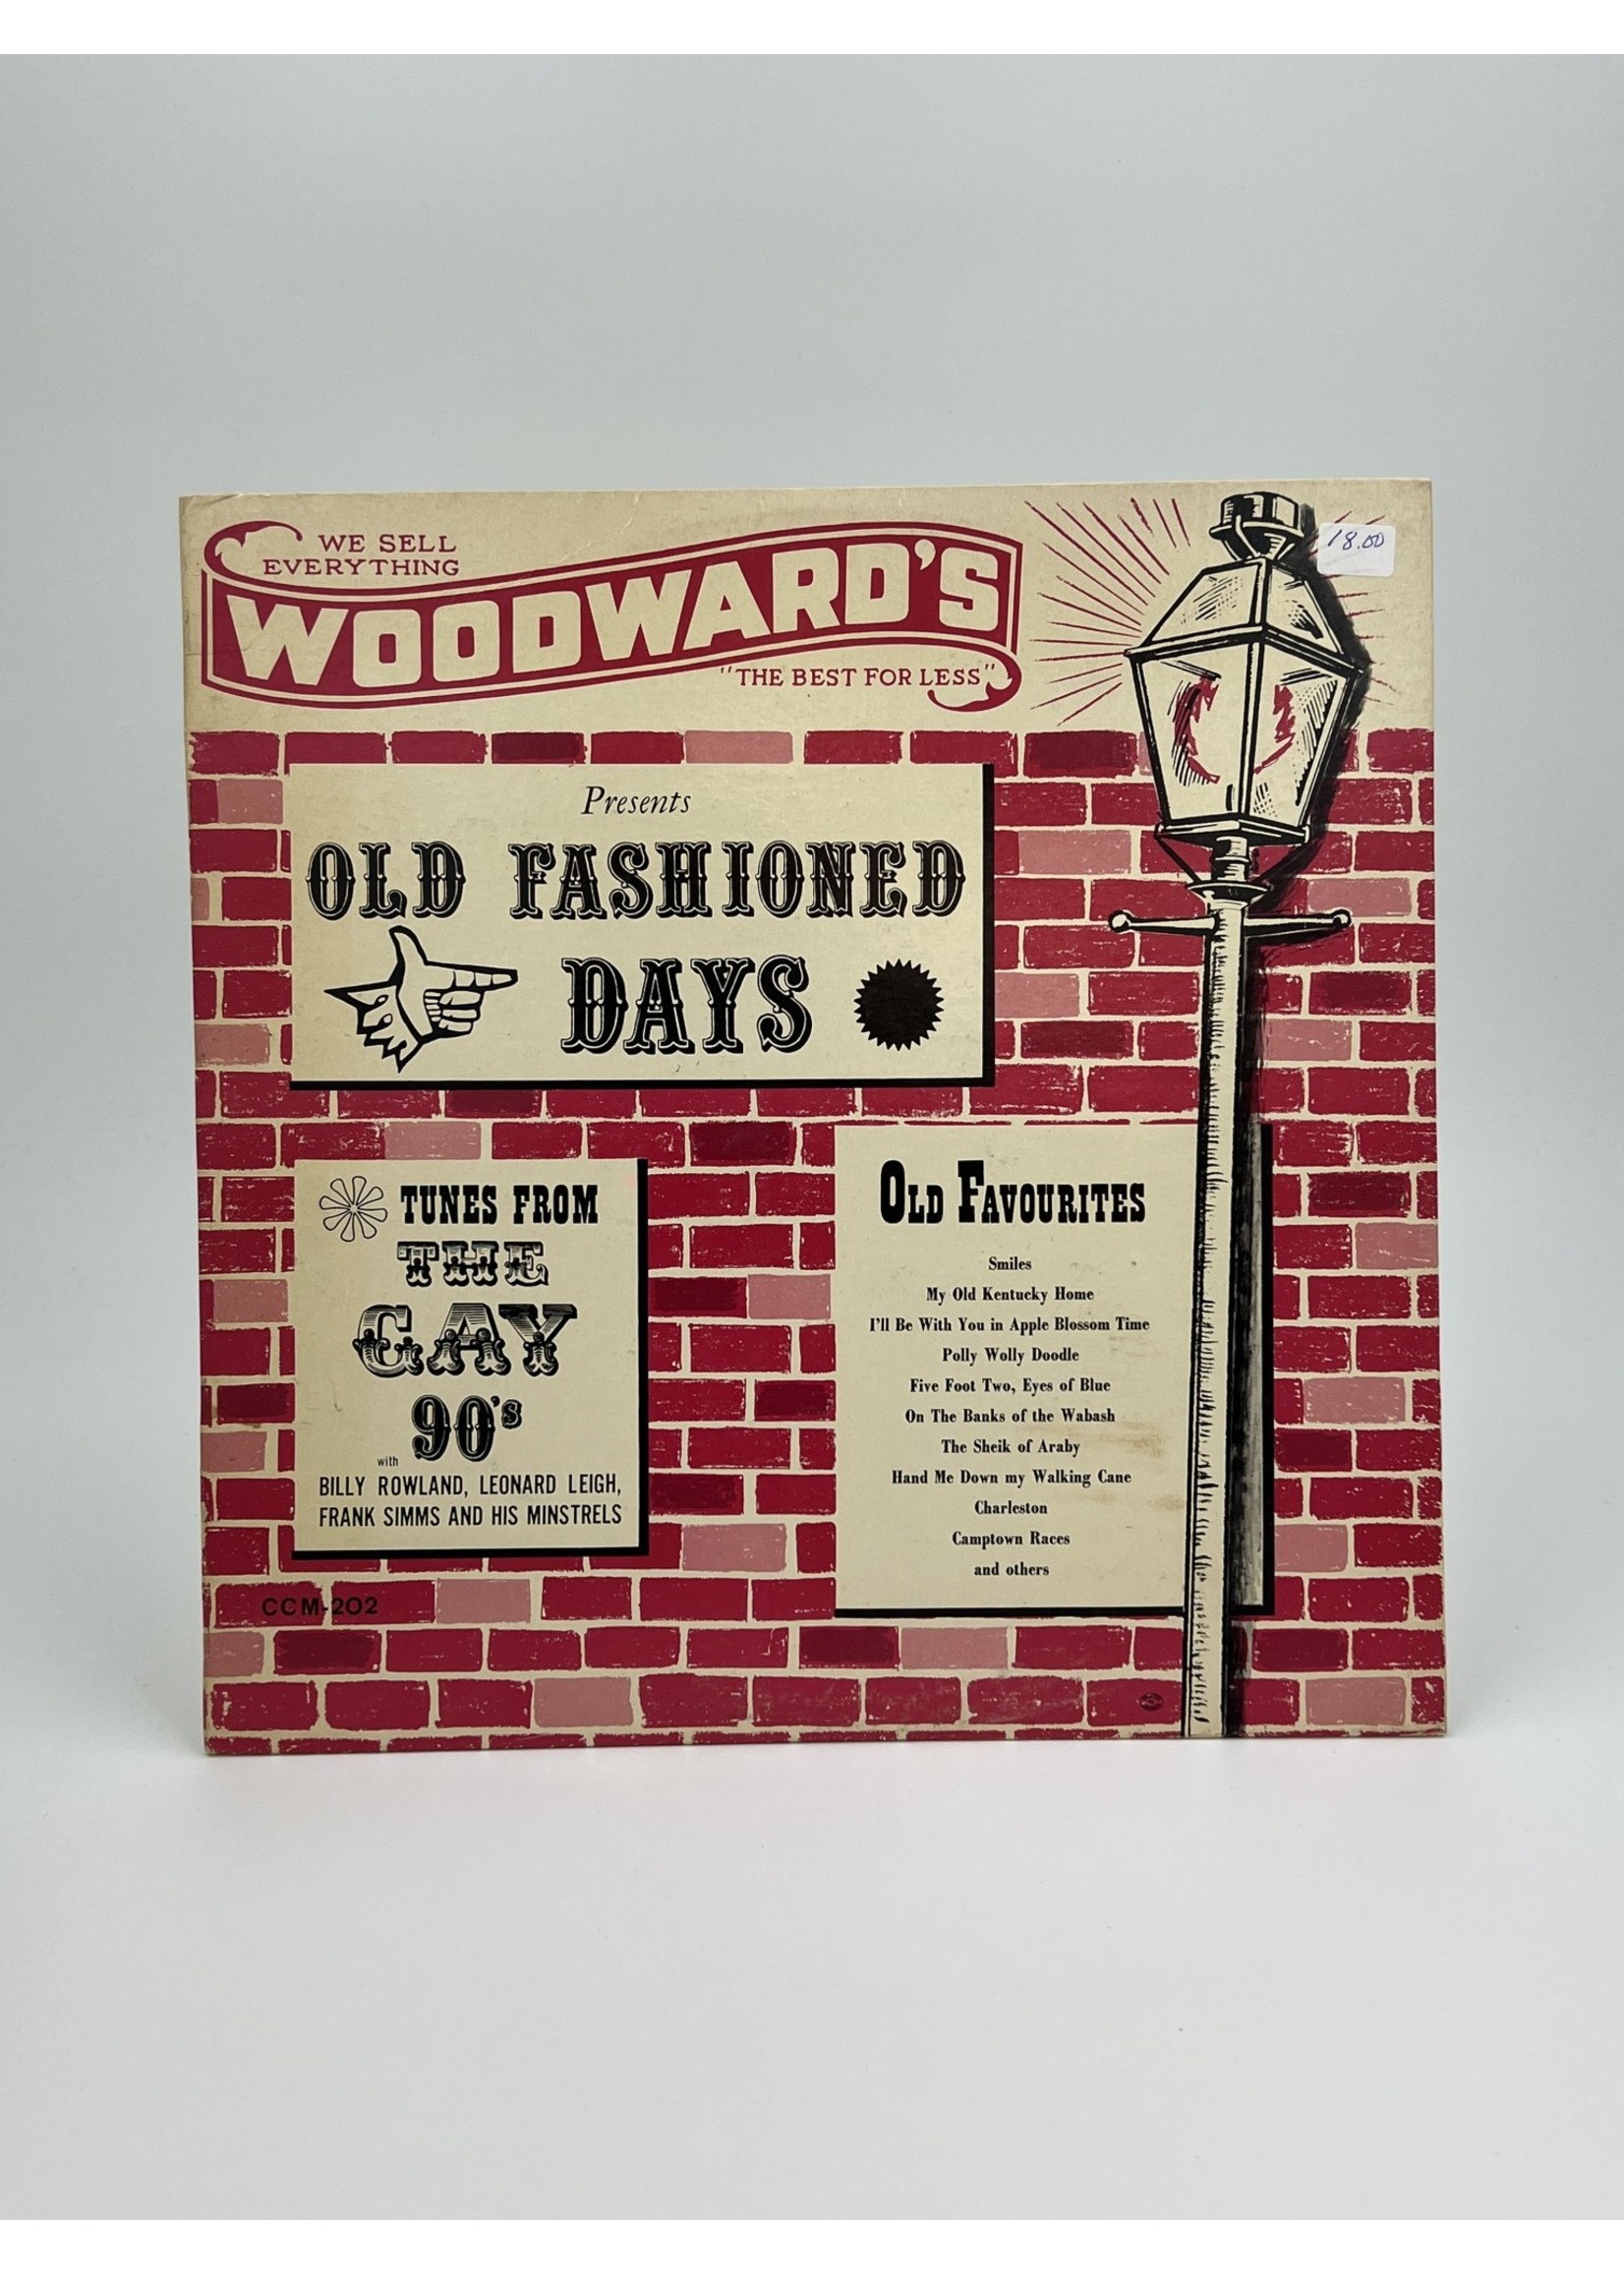 LP Woodwards Presents Old Fashioned Days var2 LP Record